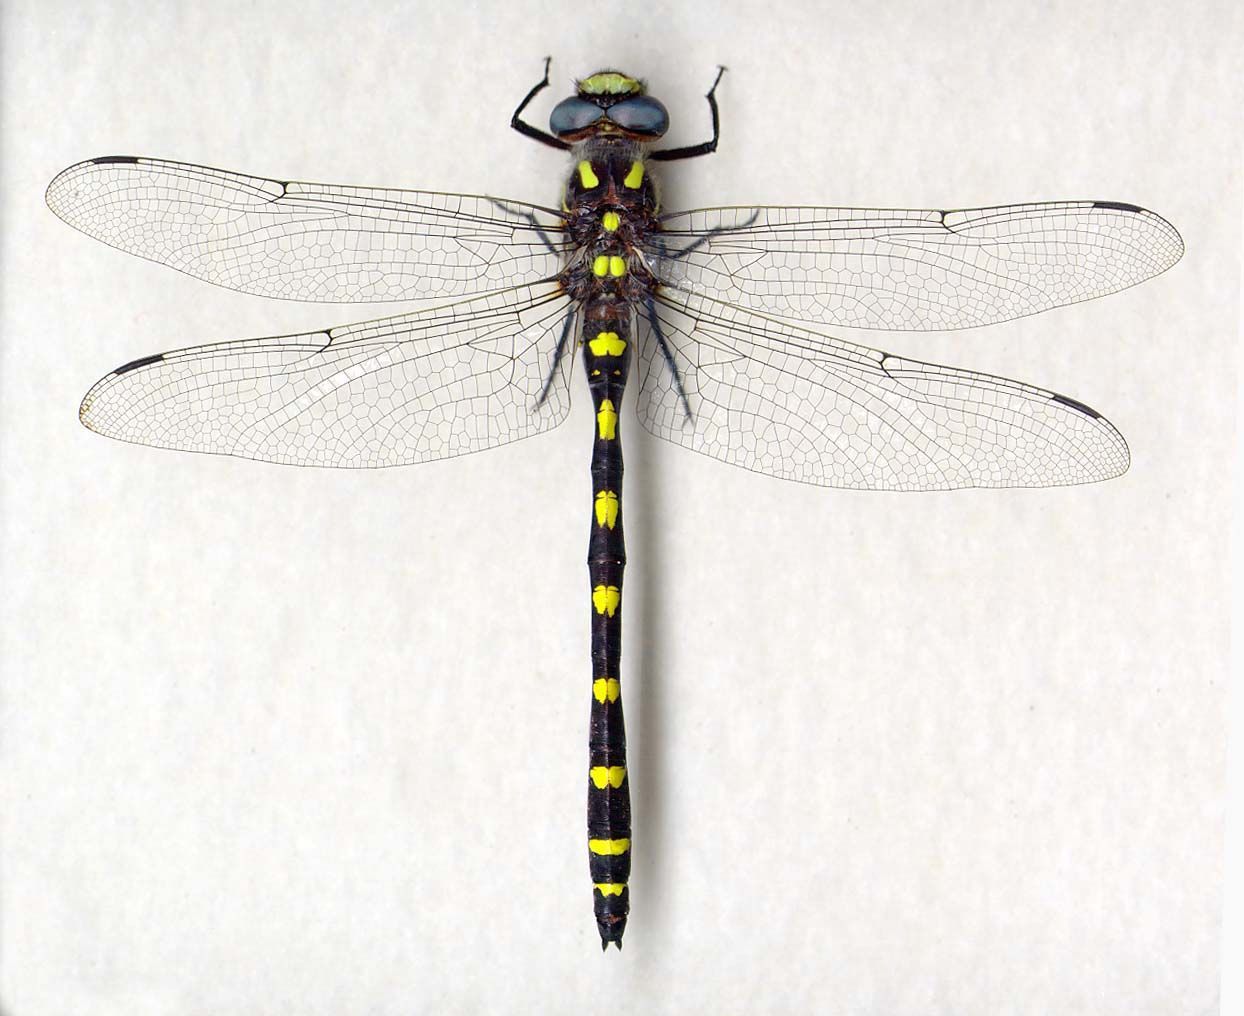 Image of Pacific Spiketail